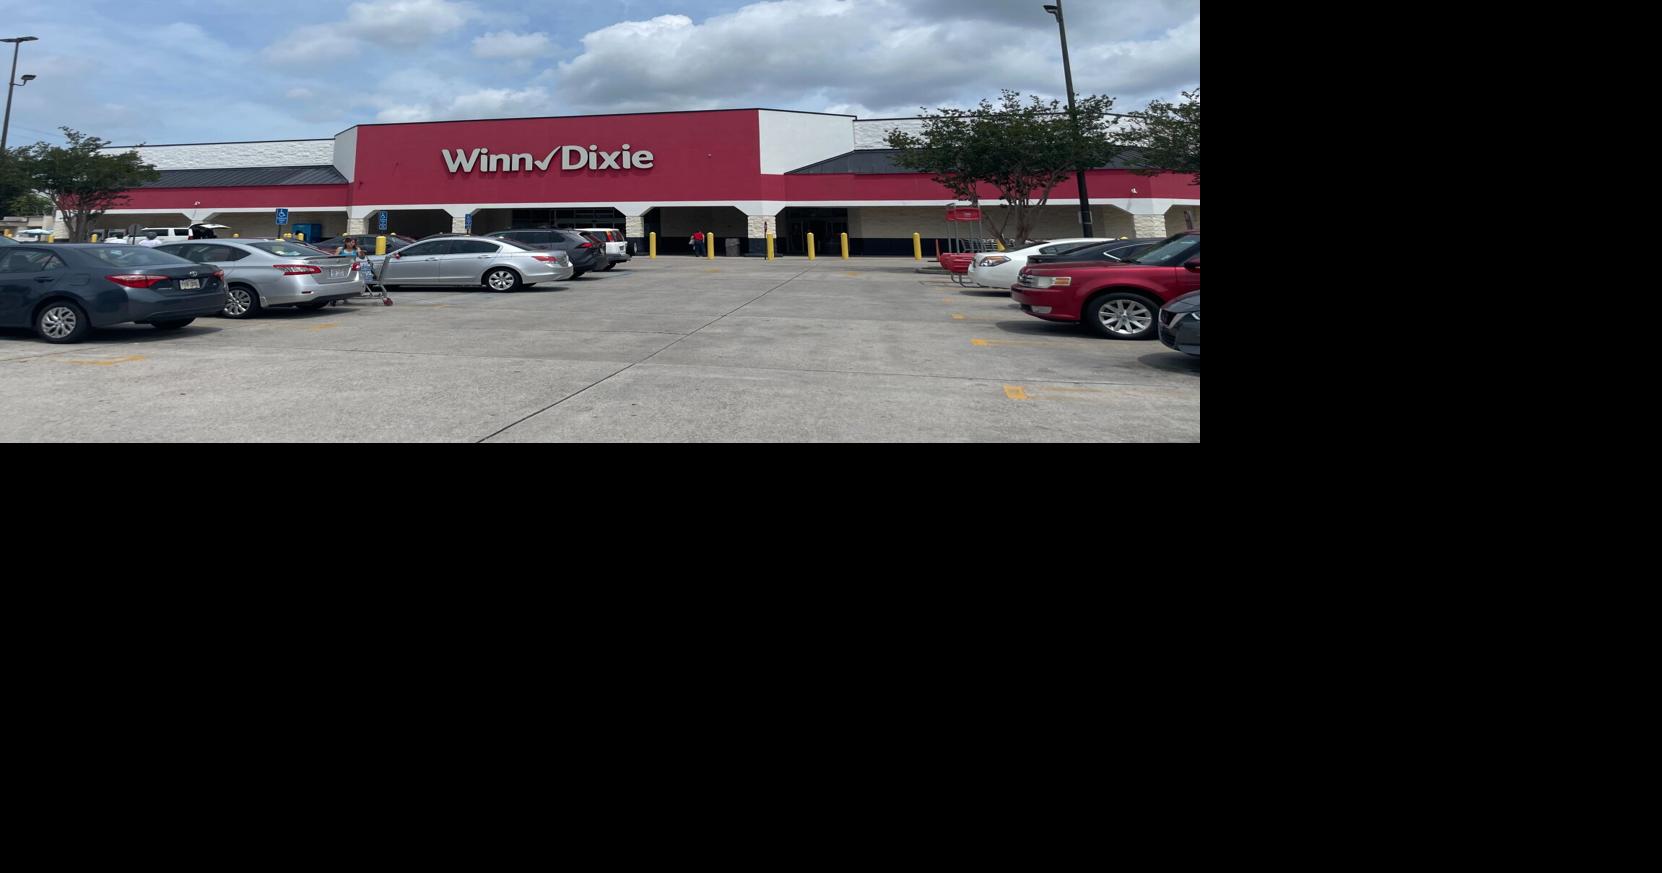 A new Aldi is coming to the New Orleans area as Winn-Dixie closes in Metairie